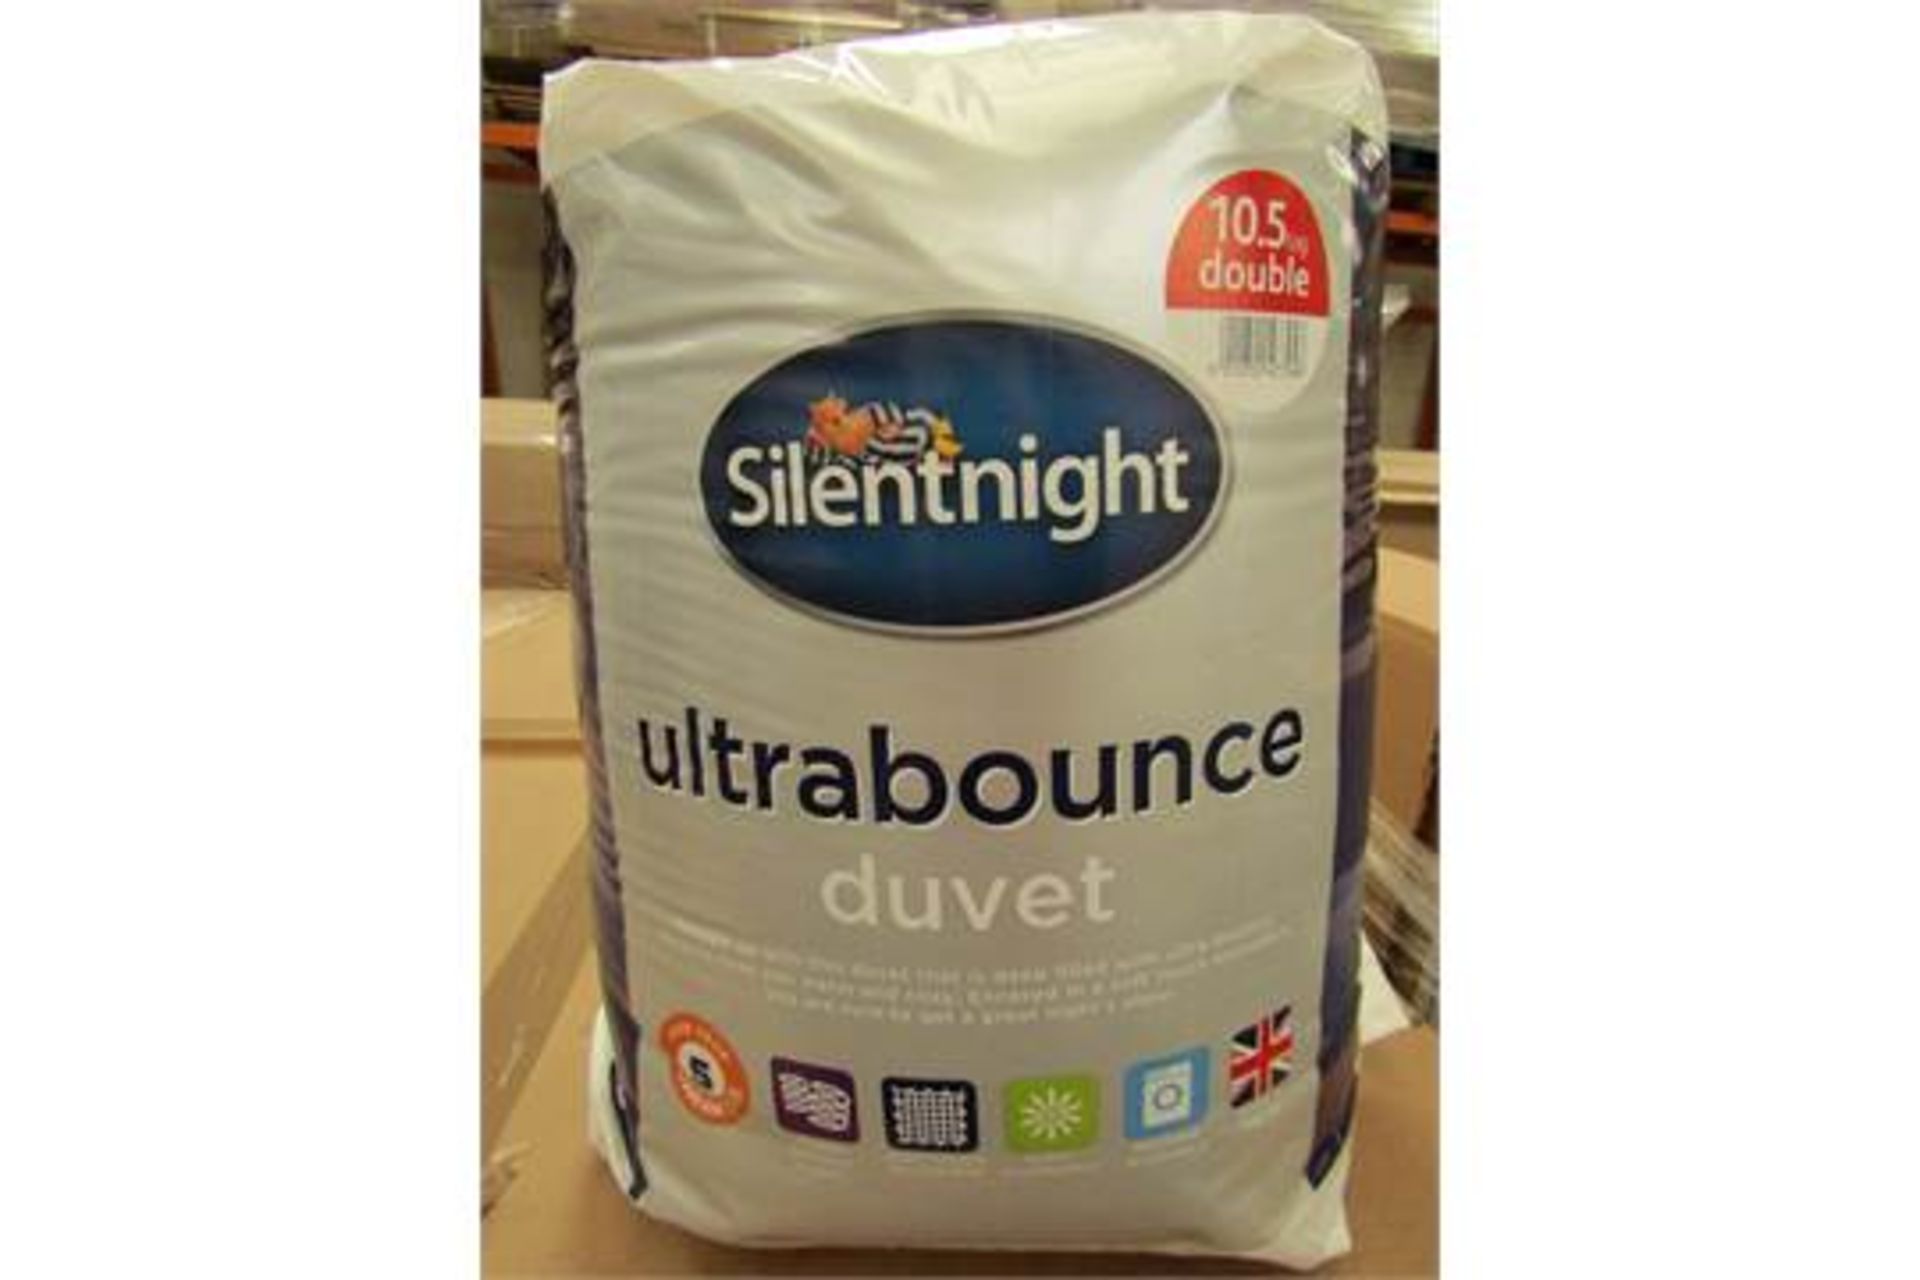 Silentnight Ultrabounce duvet. 10.5 Tog Double size, new in packaging.